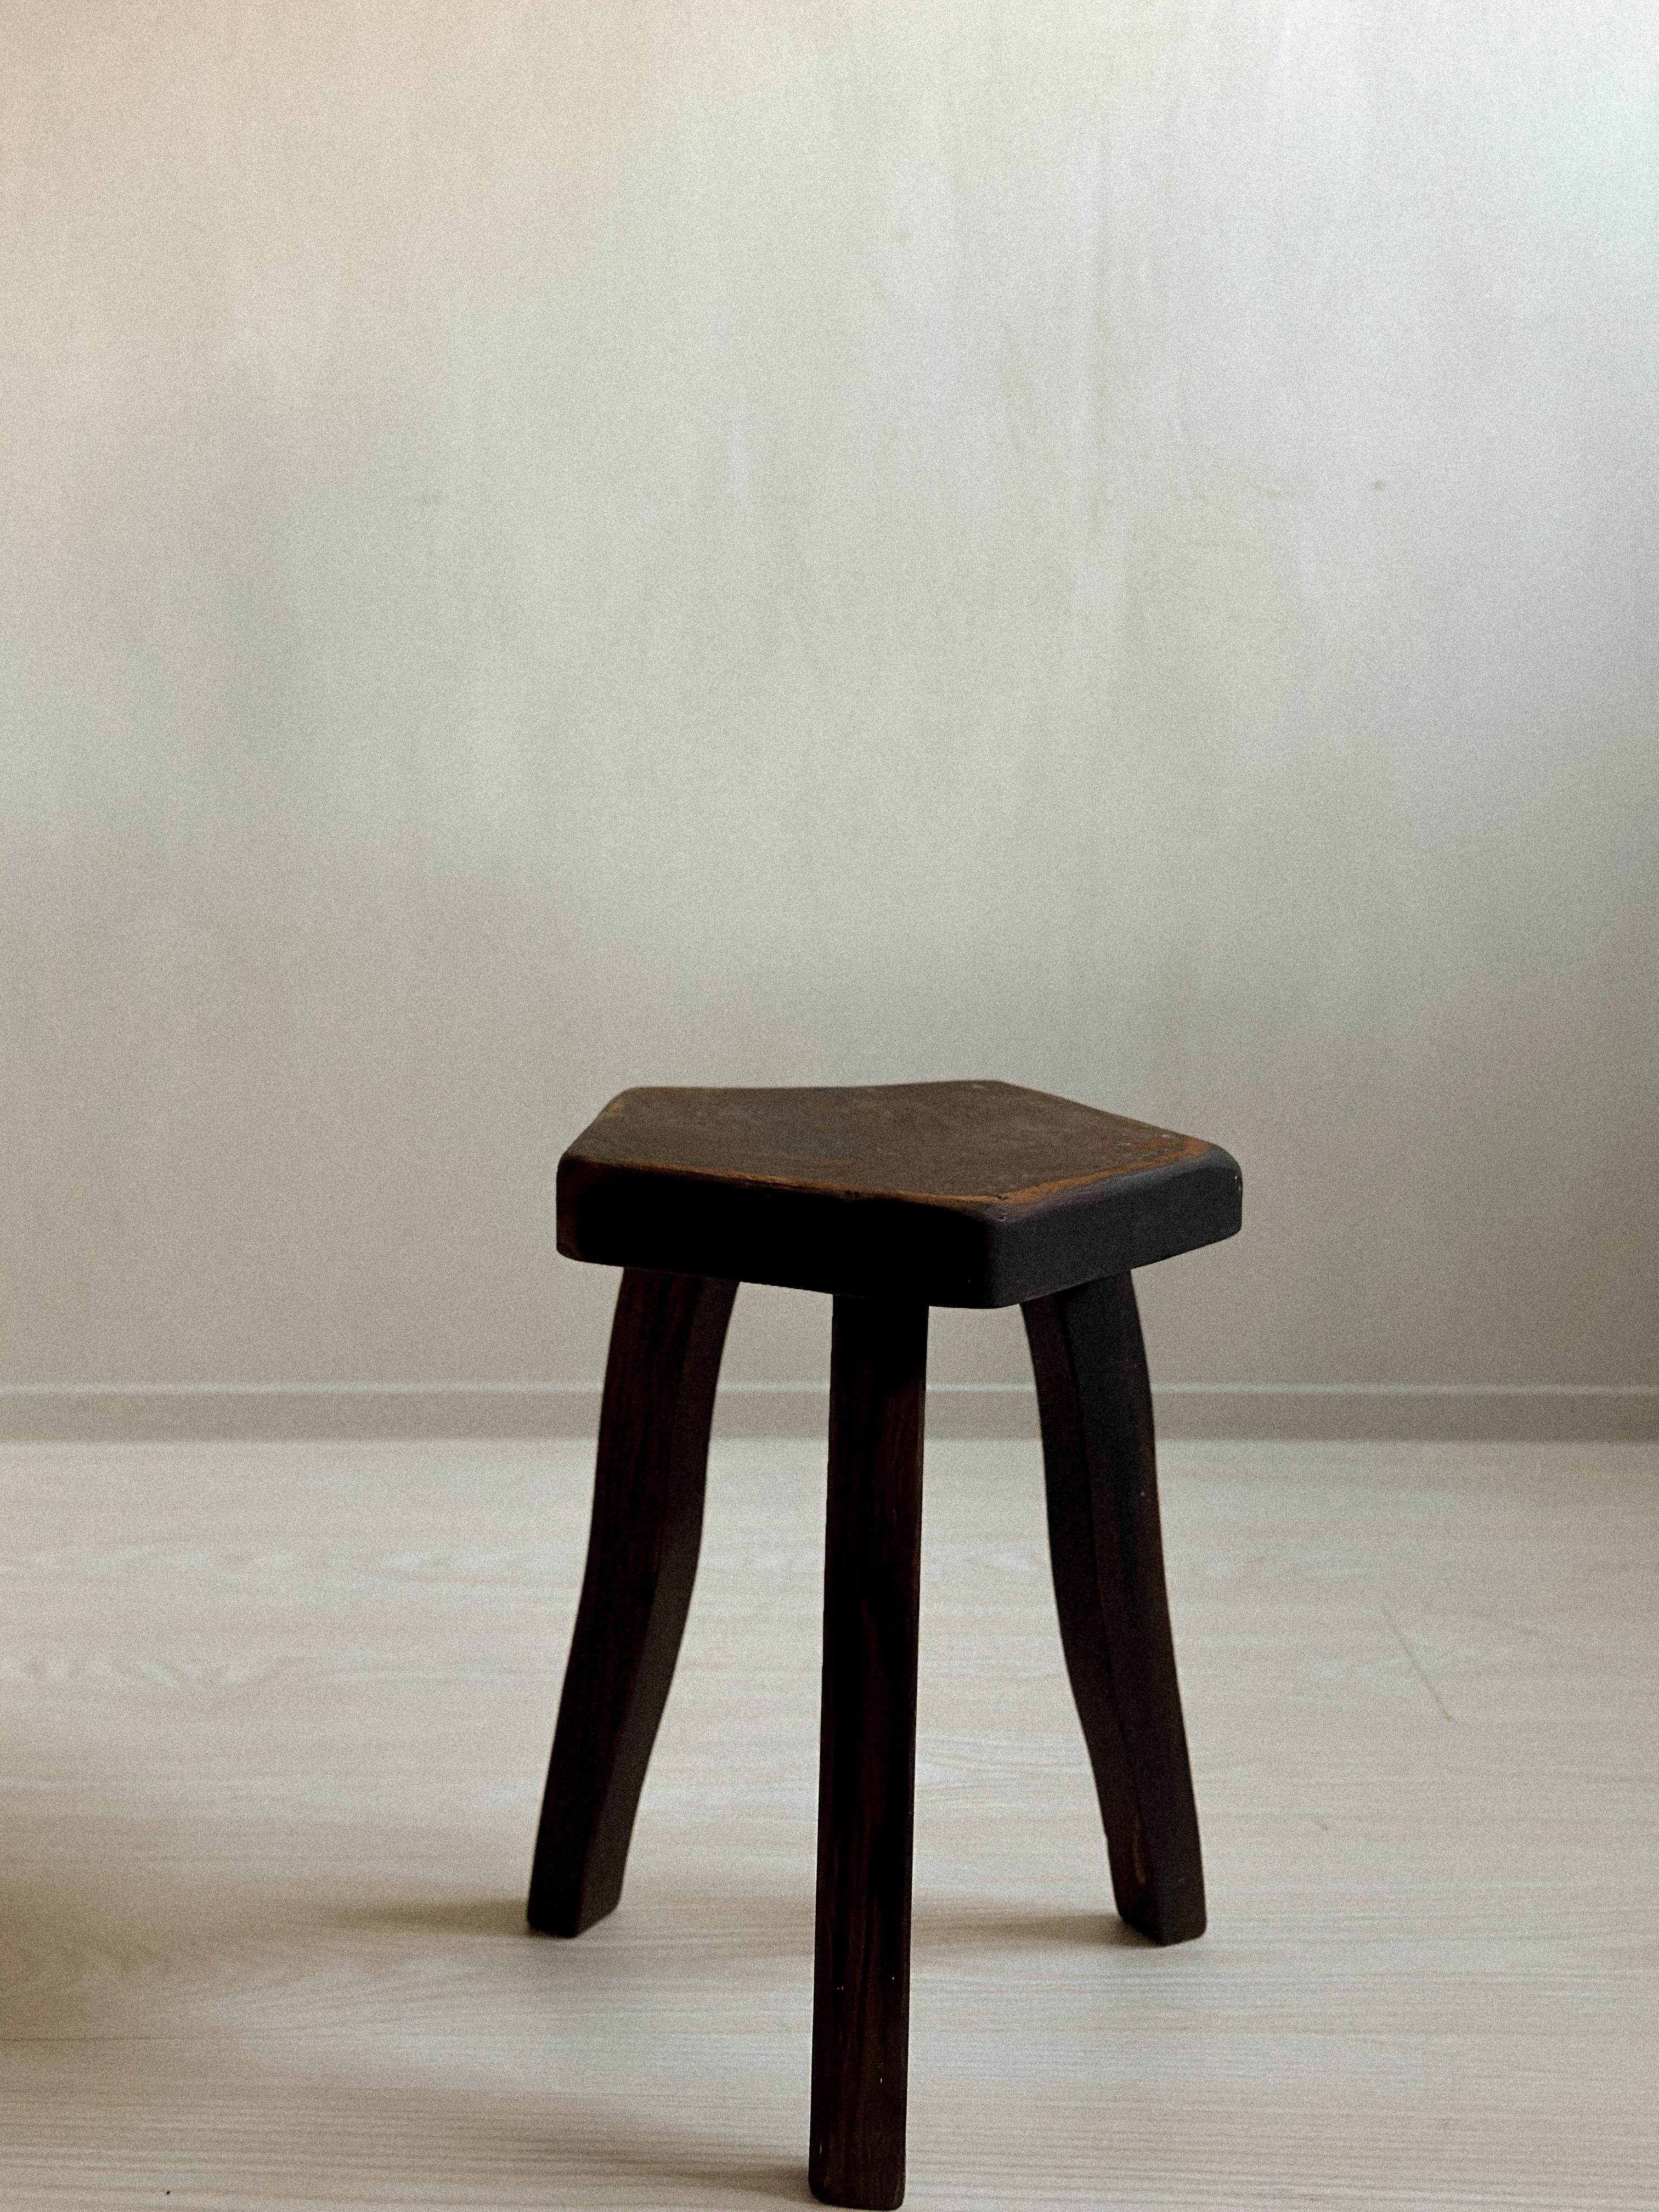 A brutalist stool manufactured by Aranjou, France, c. 1960s. Massive dark stained oak and organic shape. 

Wear consistent with age

